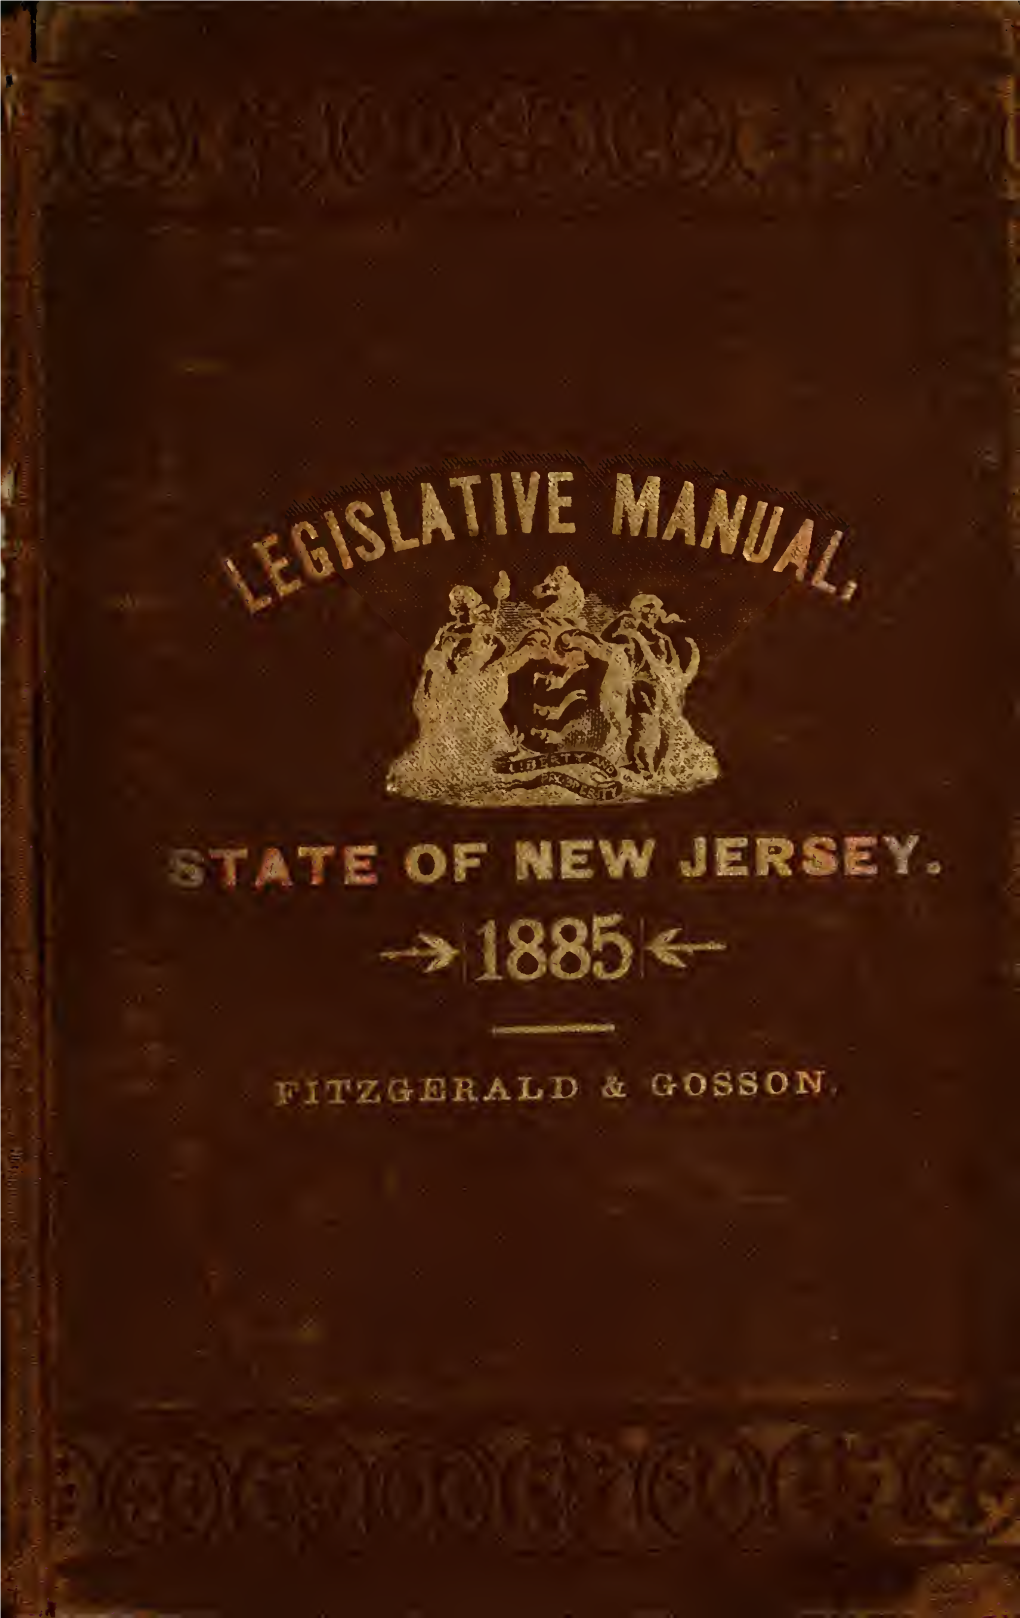 Manual of the Legislature of New Jersey Has Been Carefully Revised, Remodeled, Set in New Type, and Is Printed on an Extra Quality of Paper